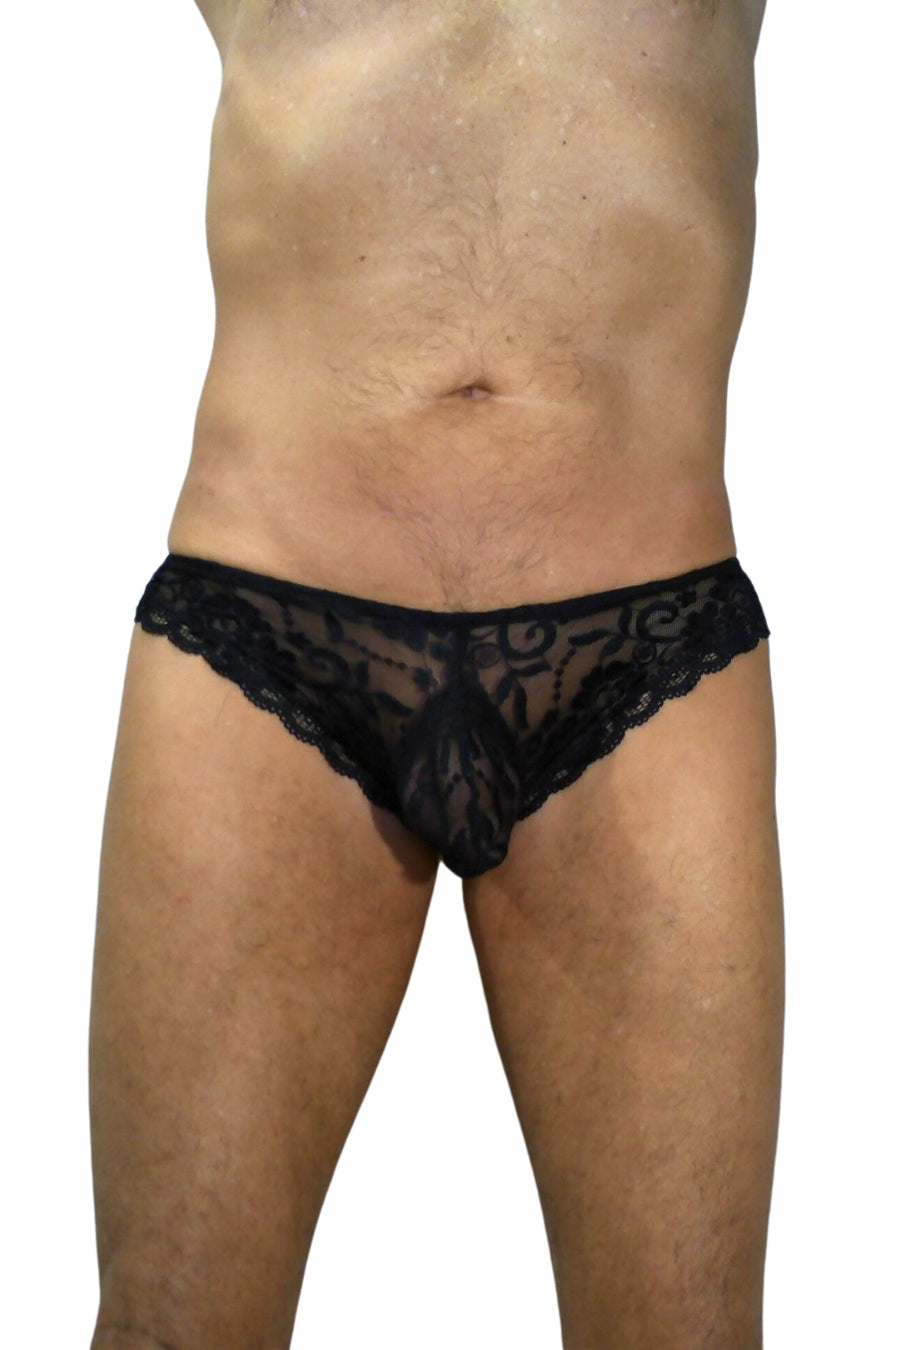 Full front view of Black Lace Brief. Model is 6'2" 190 pounds, 8 inches cut full shaved around genitals